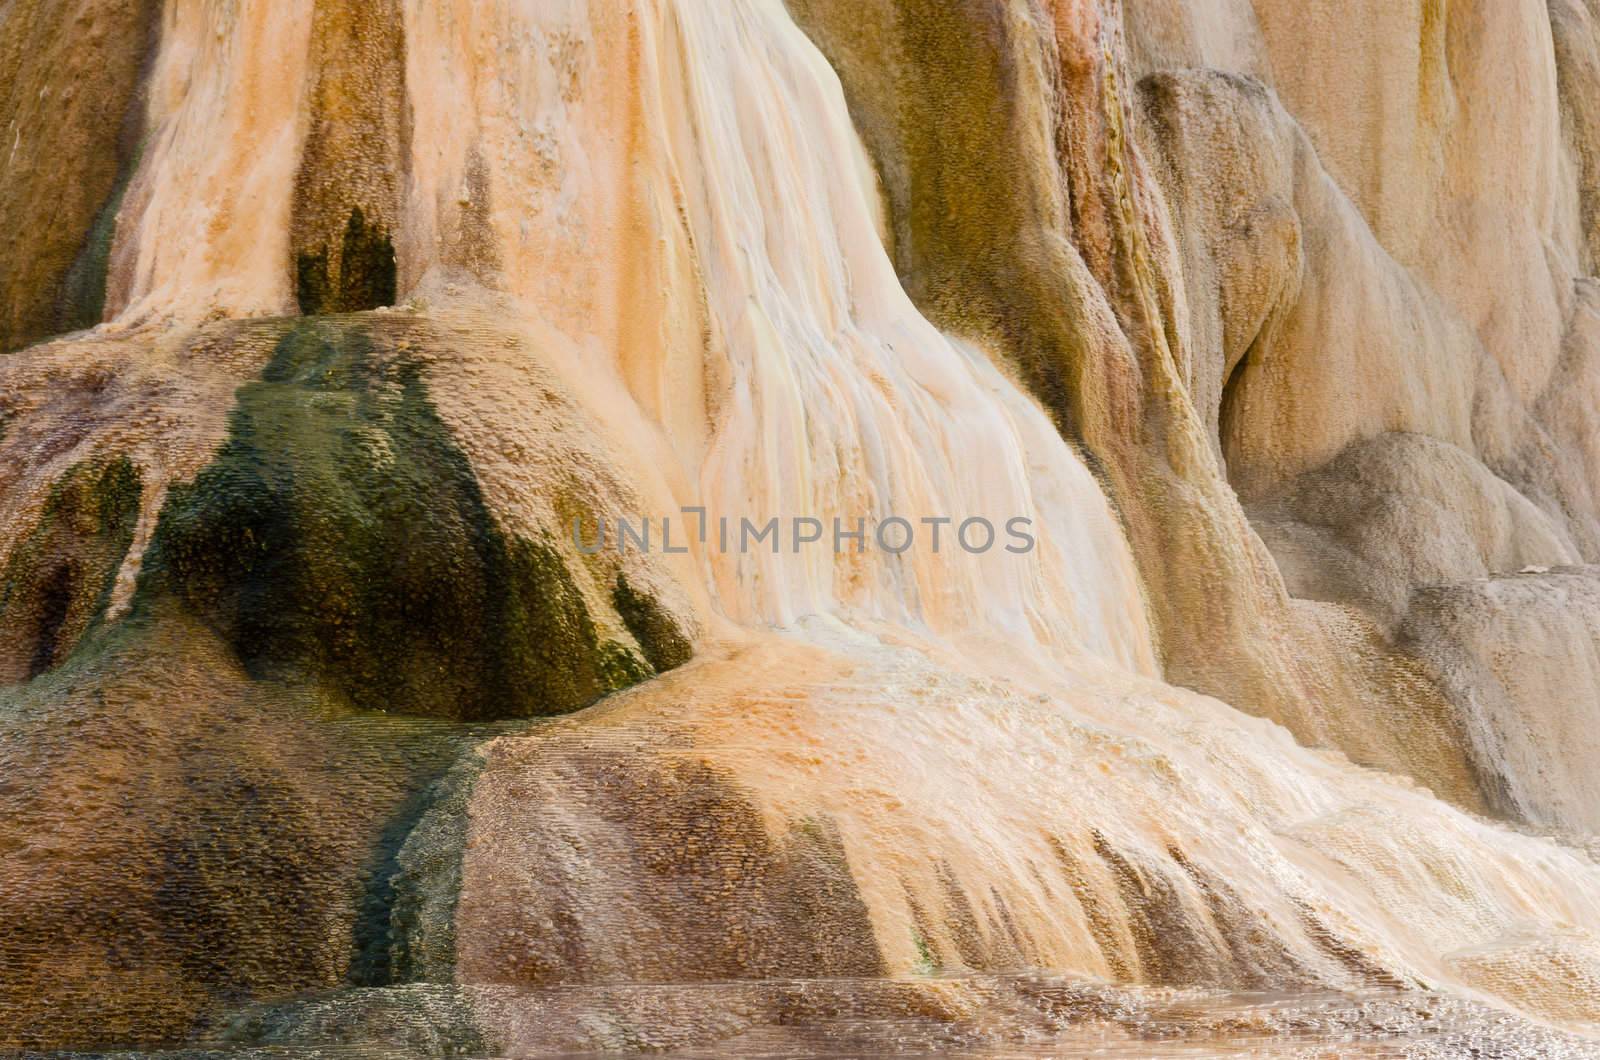 Detail of Mound Terrace, Mammoth Hot Springs, Yellowstone National Park, Wyoming, USA